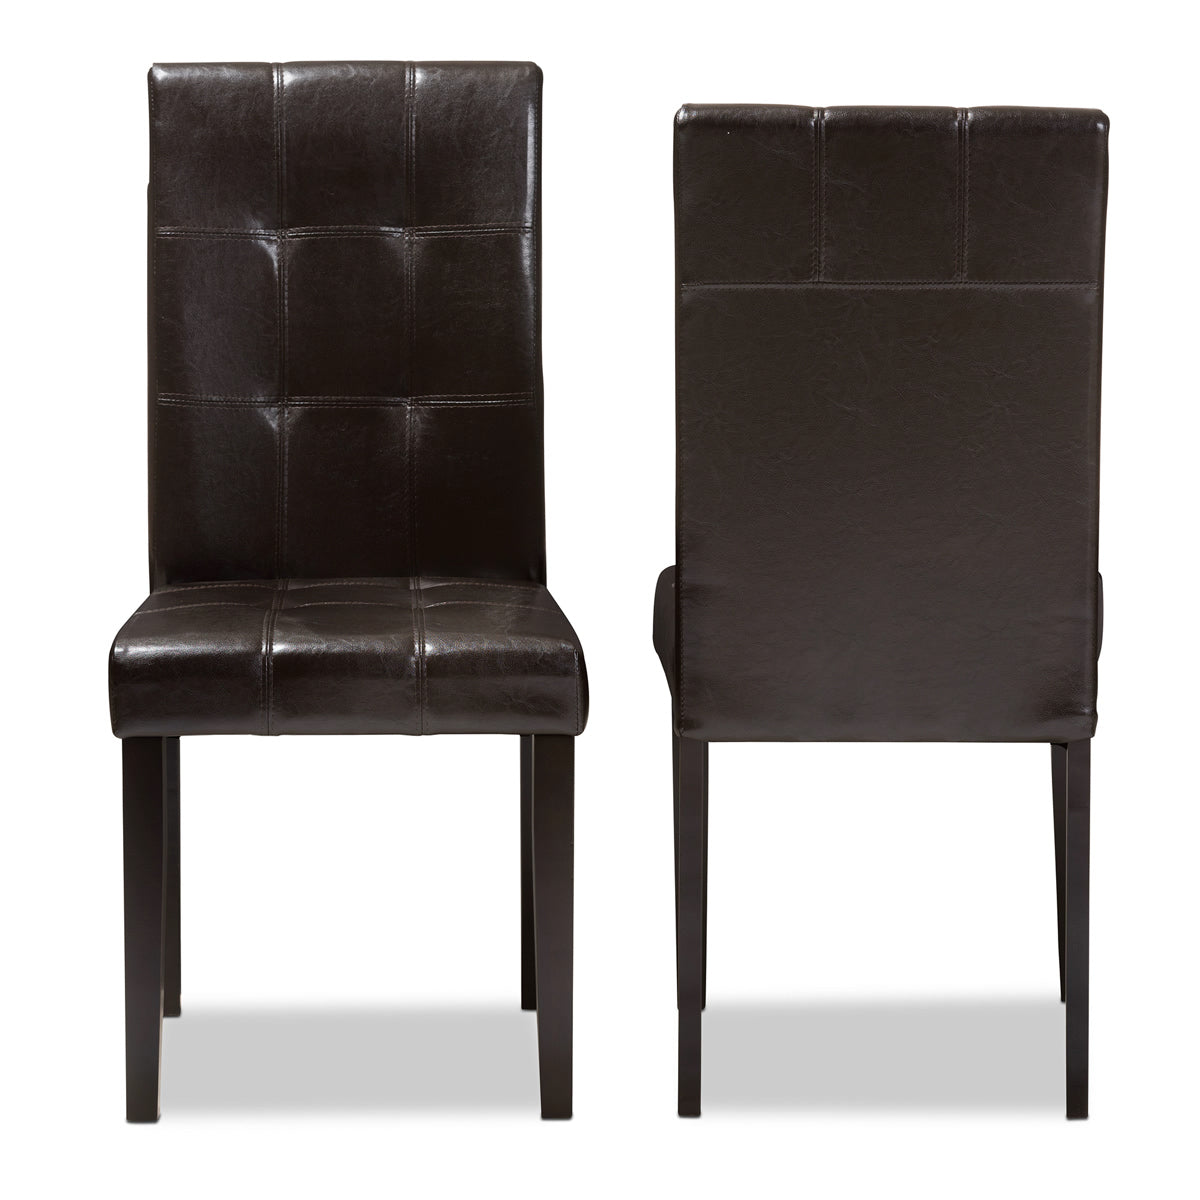 Baxton Studio Avery Modern and Contemporary Dark Brown Faux Leather Upholstered Dining Chair (Set of 2) Baxton Studio-dining chair-Minimal And Modern - 2